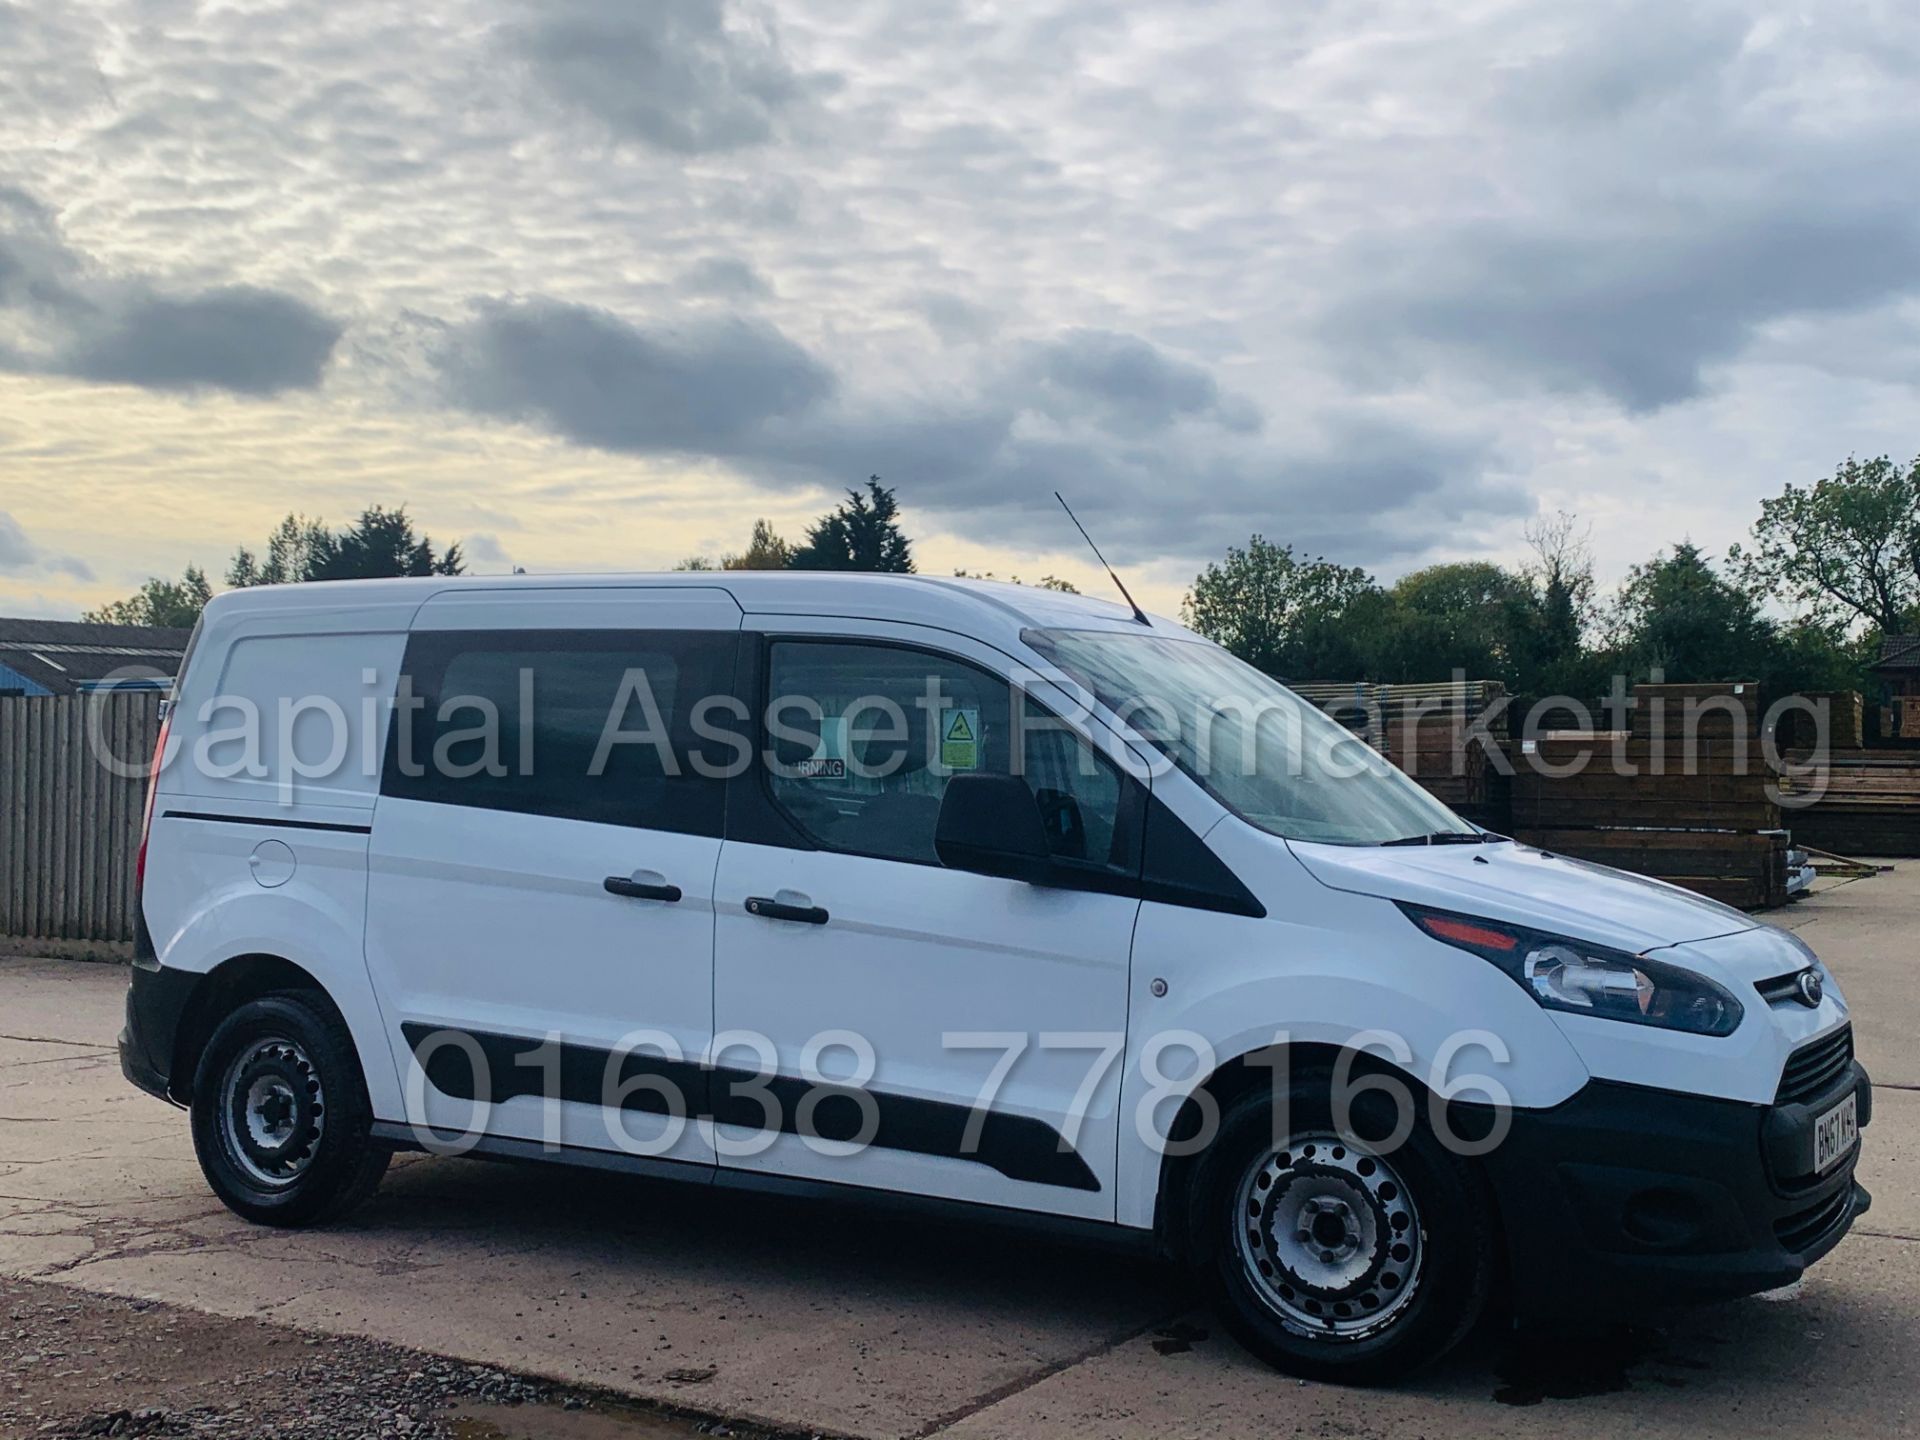 (ON SALE) FORD TRANSIT CONNECT *LWB - 5 SEATER CREW VAN* (2018 - EURO 6) 1.5 TDCI *A/C* (1 OWNER) - Image 11 of 40